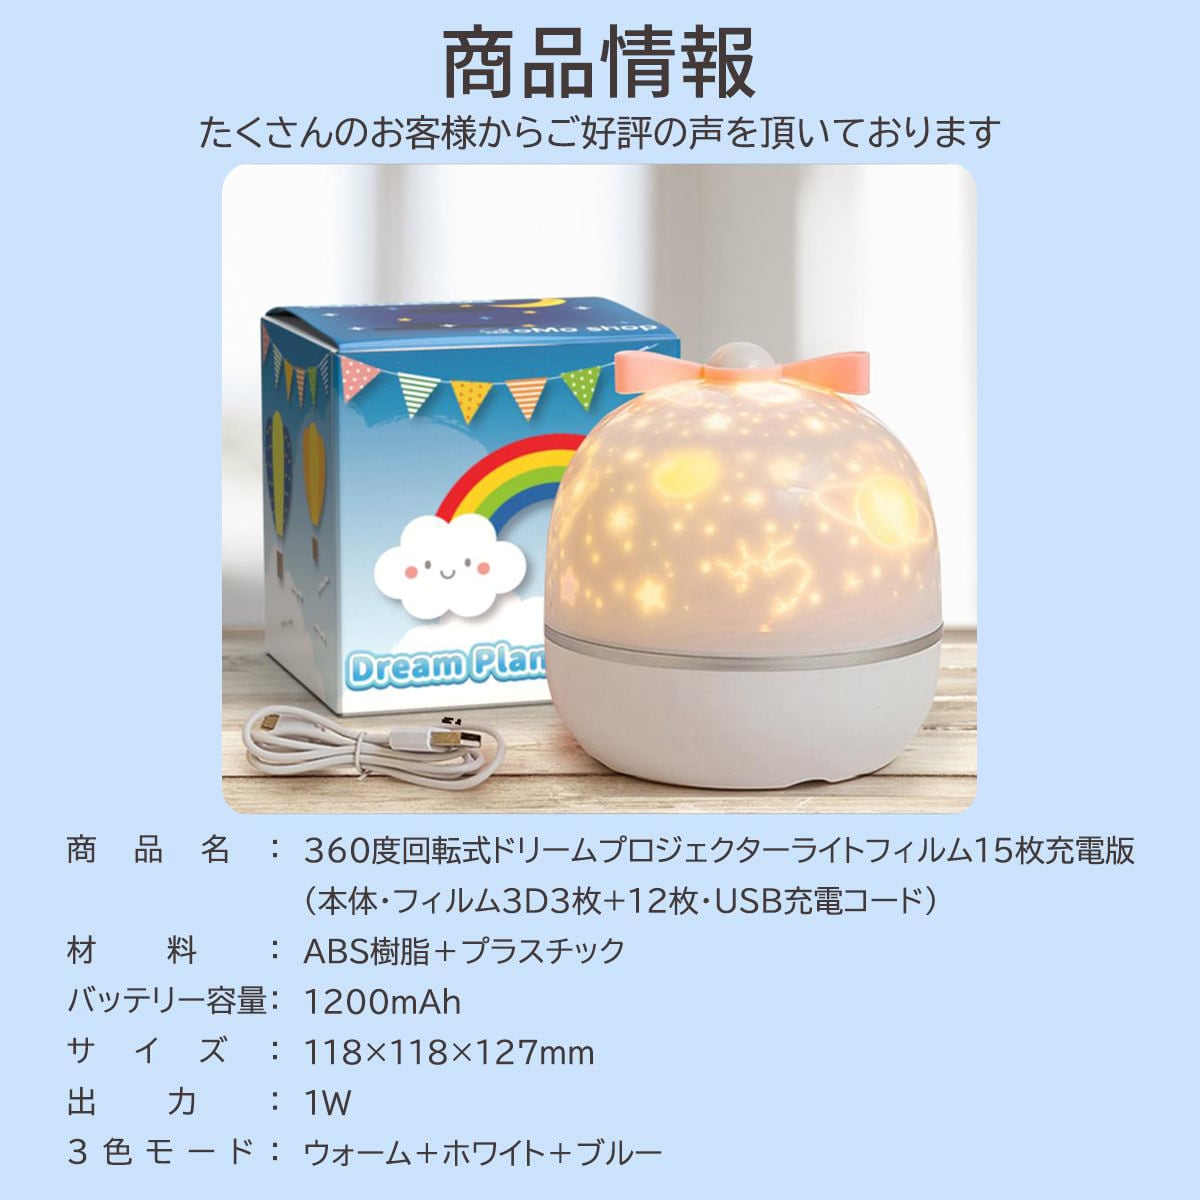 SALE／59%OFF】 12種類投影フィルム プラネタリウム 家庭用 人気 本格的 子供 星座 鹿 月 太陽系 キッズ 月球プロ 